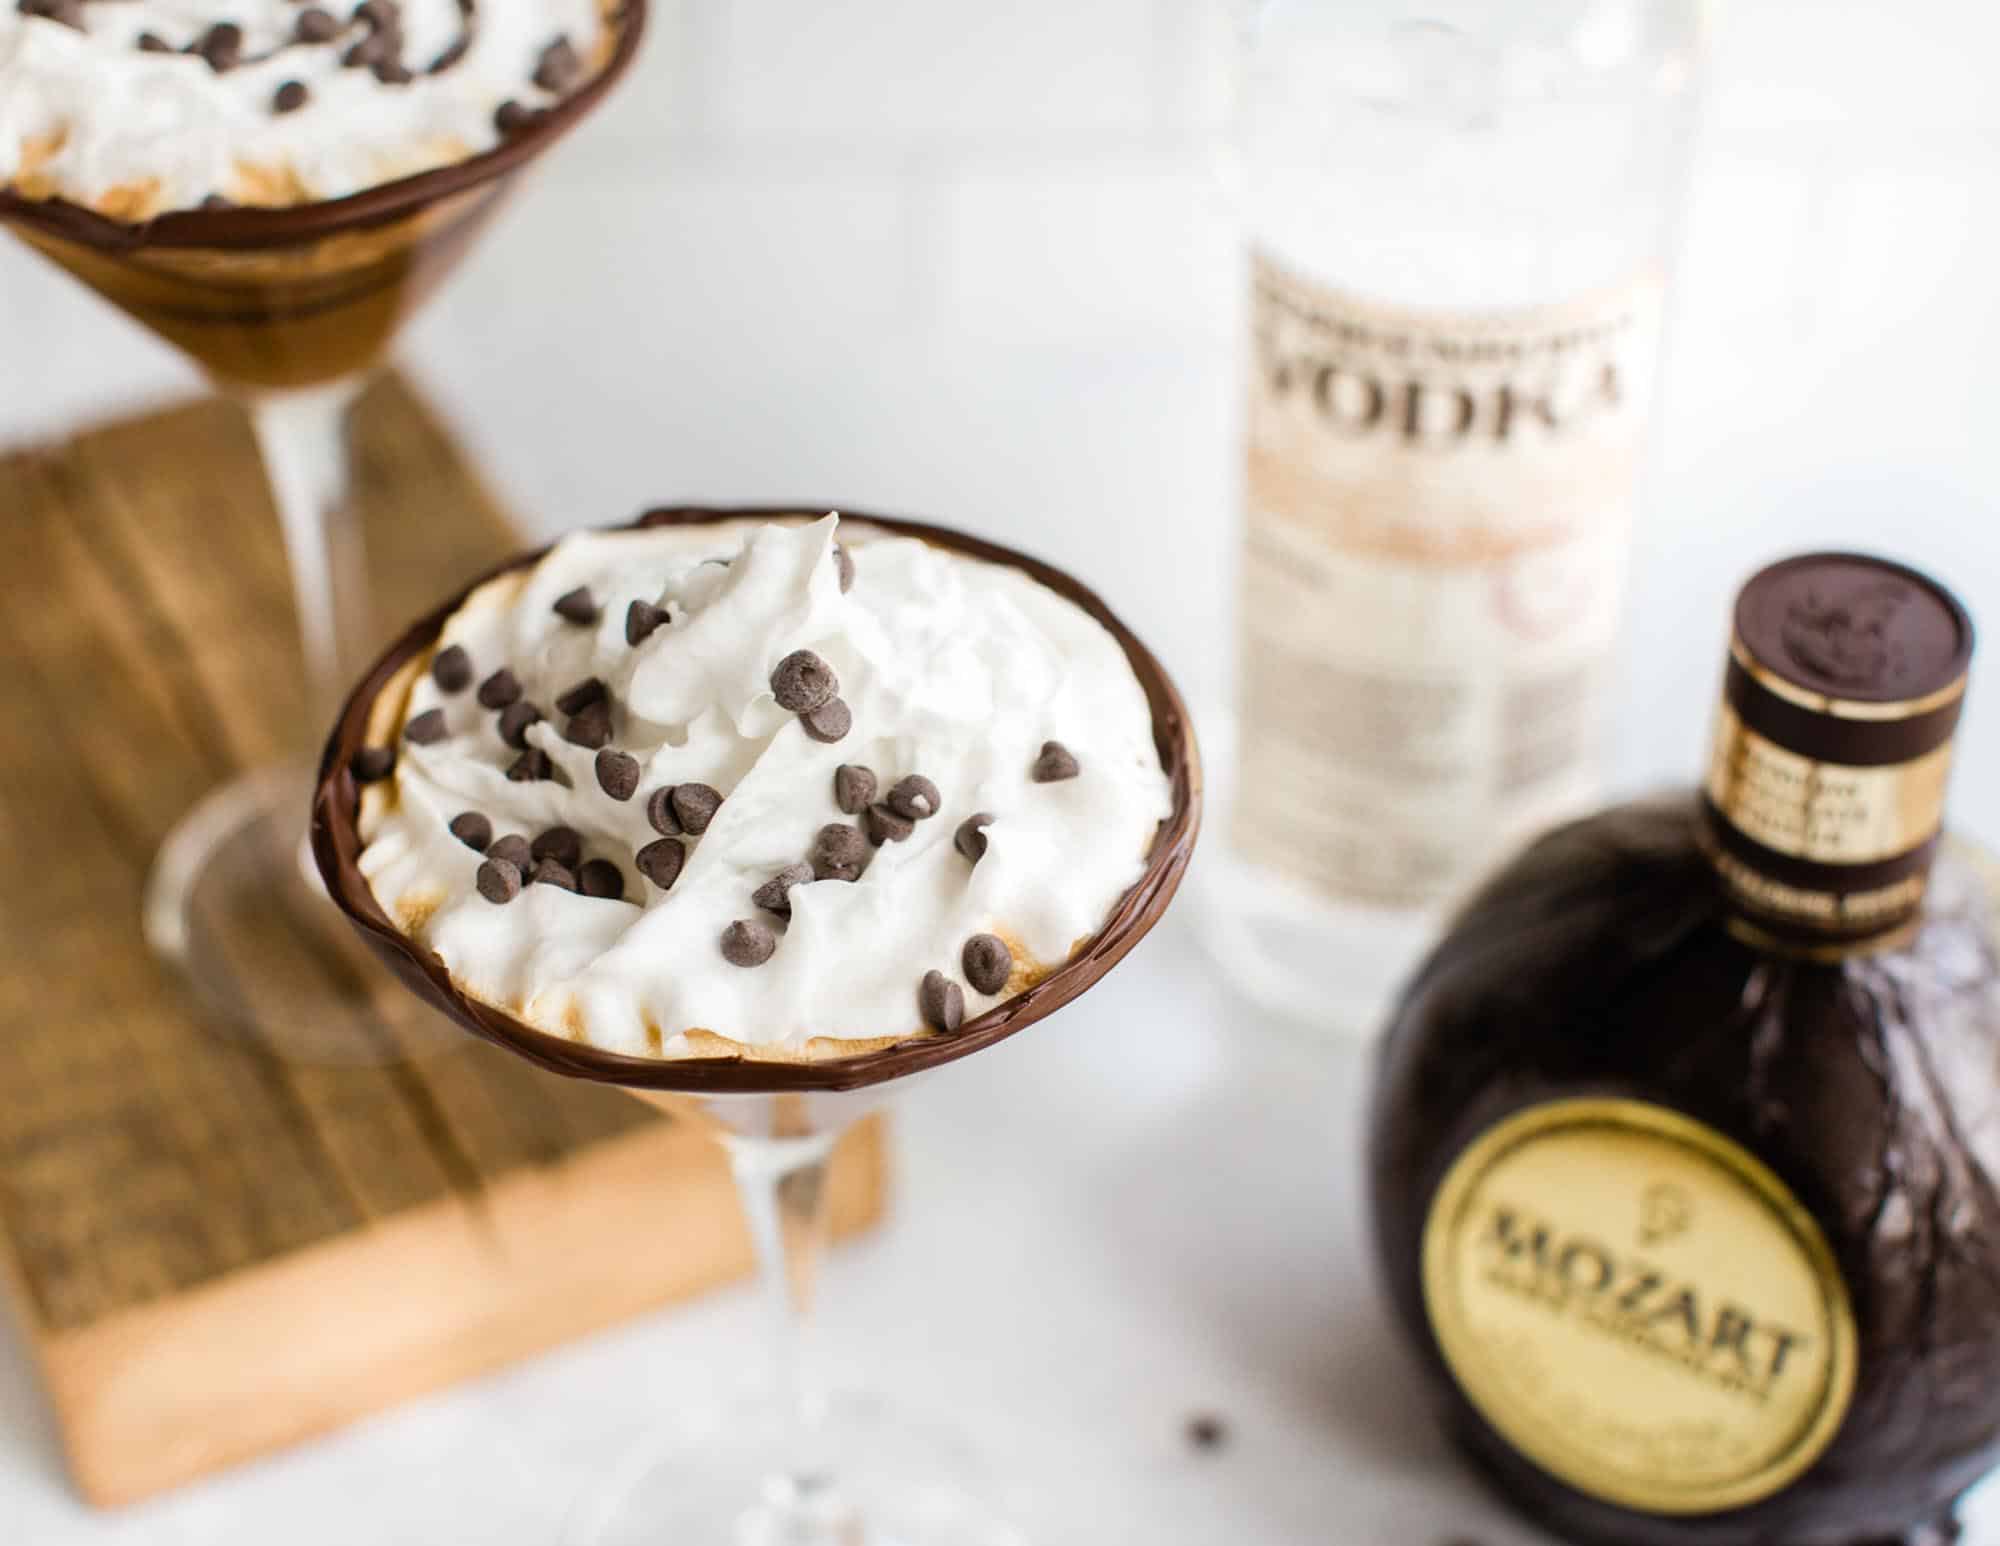 Vegan Whipped Cream on a Chocolate Cocktail